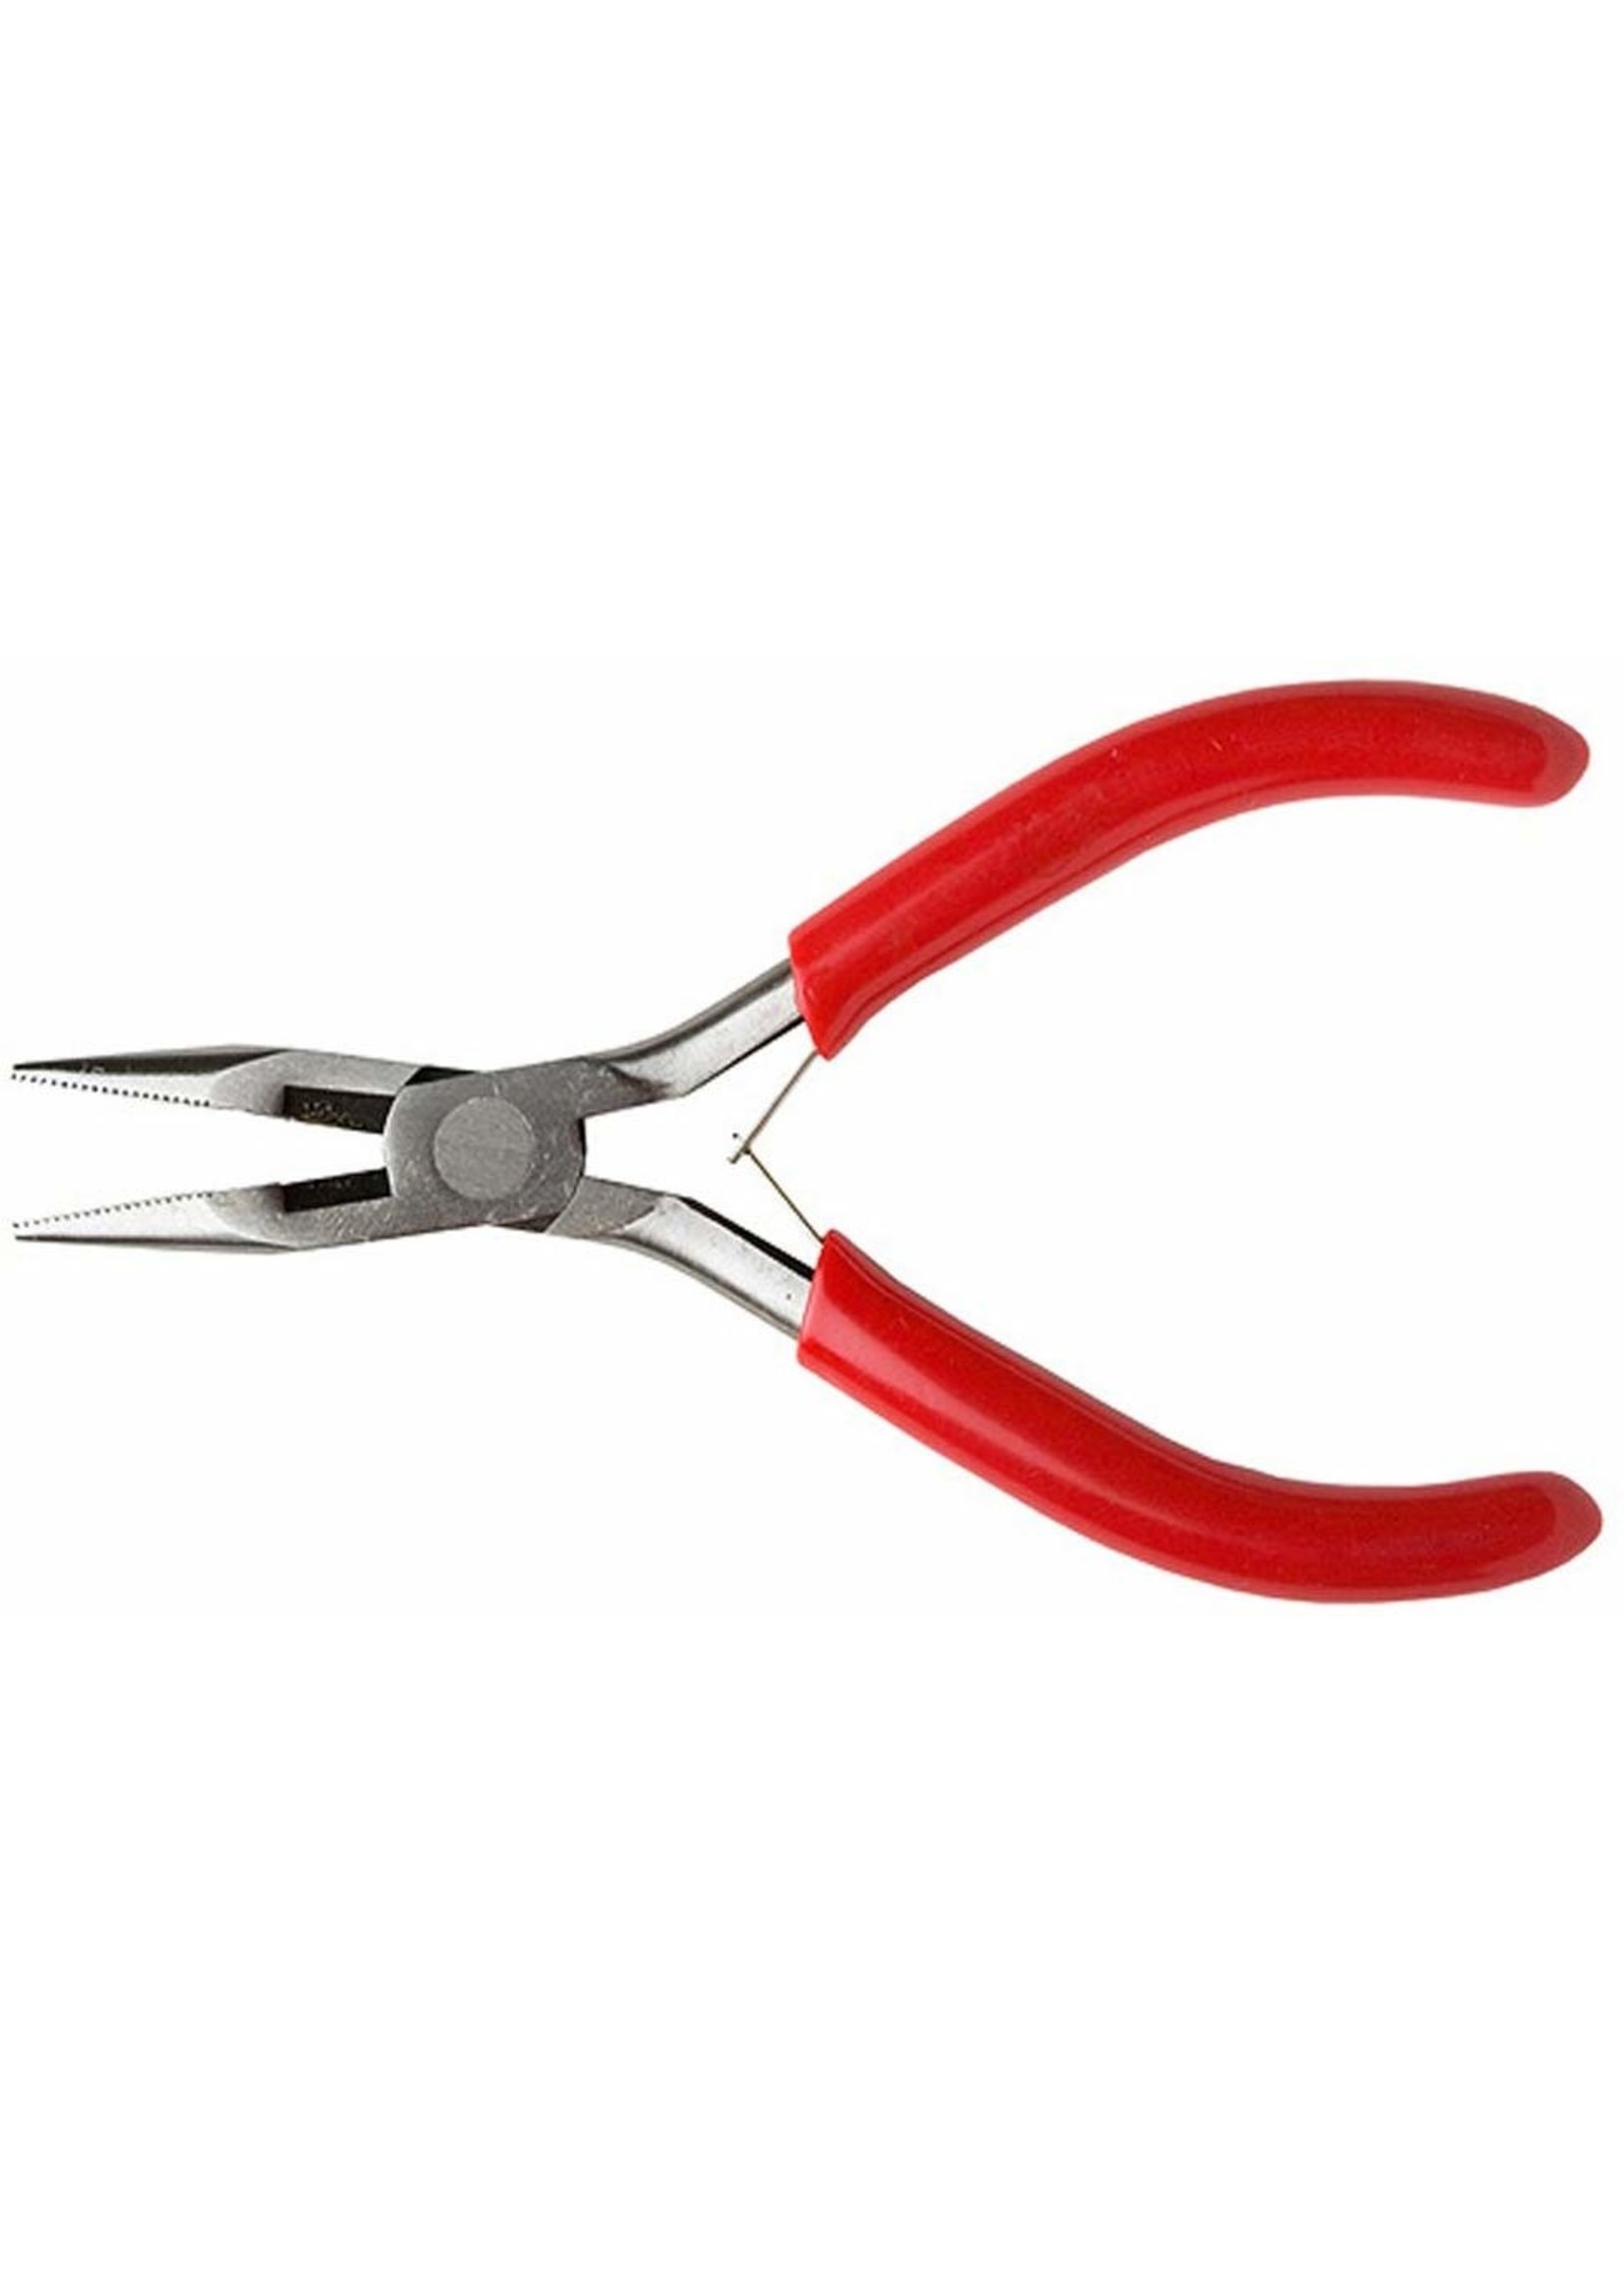 Excel 55580 - Needle Nose Pliers with Side Cutter